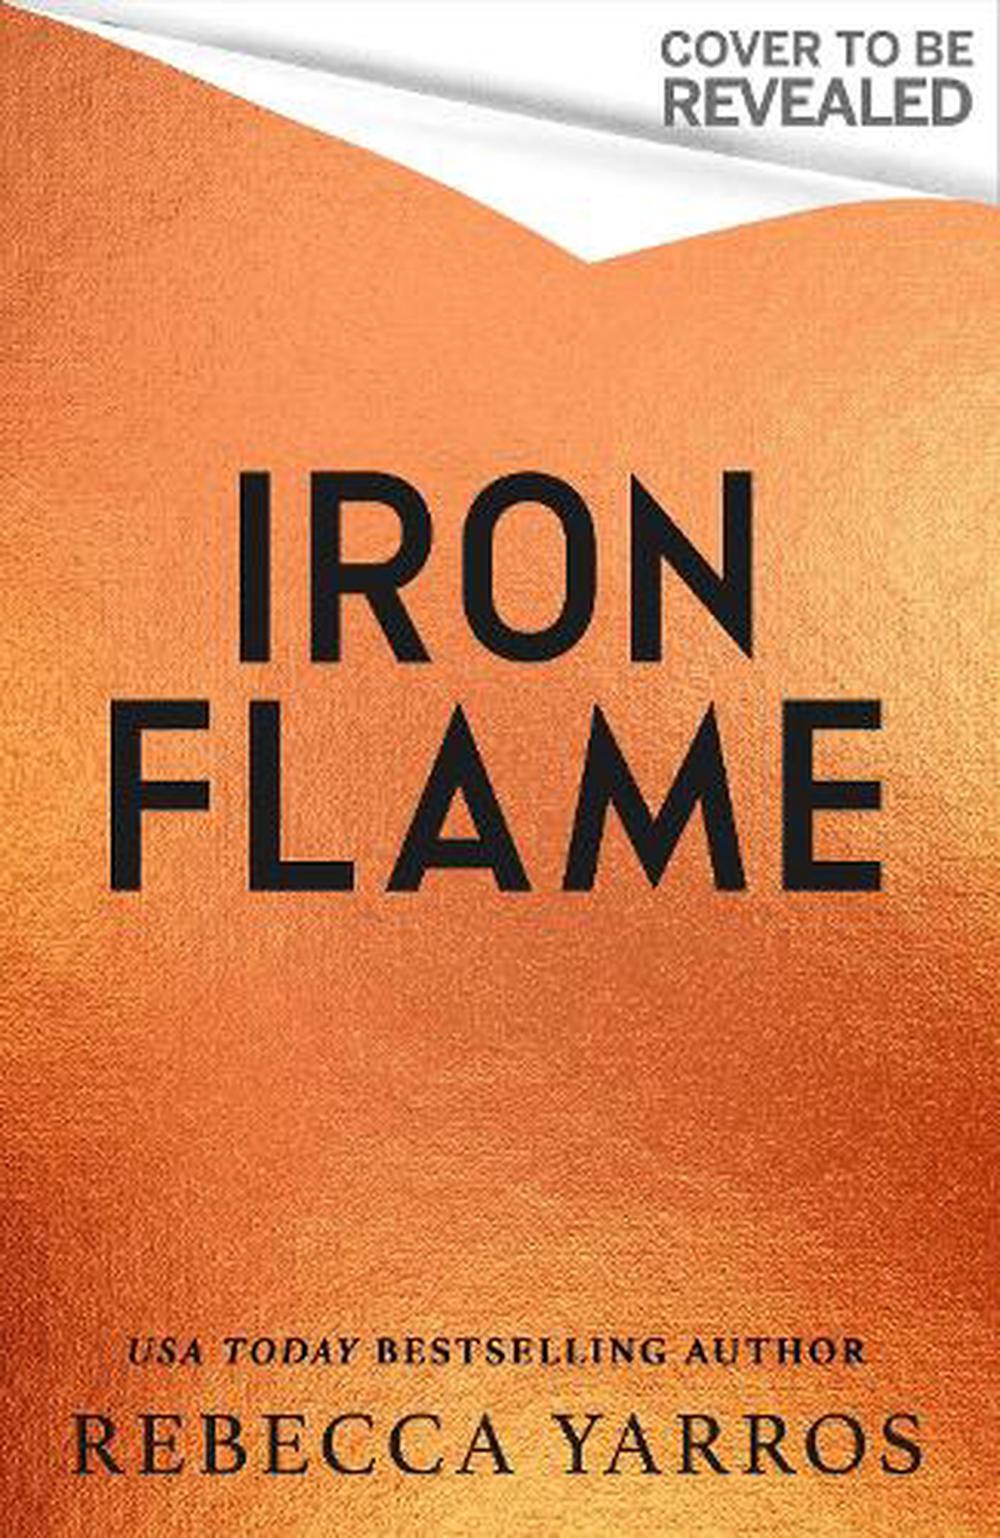 Iron Flame by Rebecca Yarros, Hardcover, 9780349437026